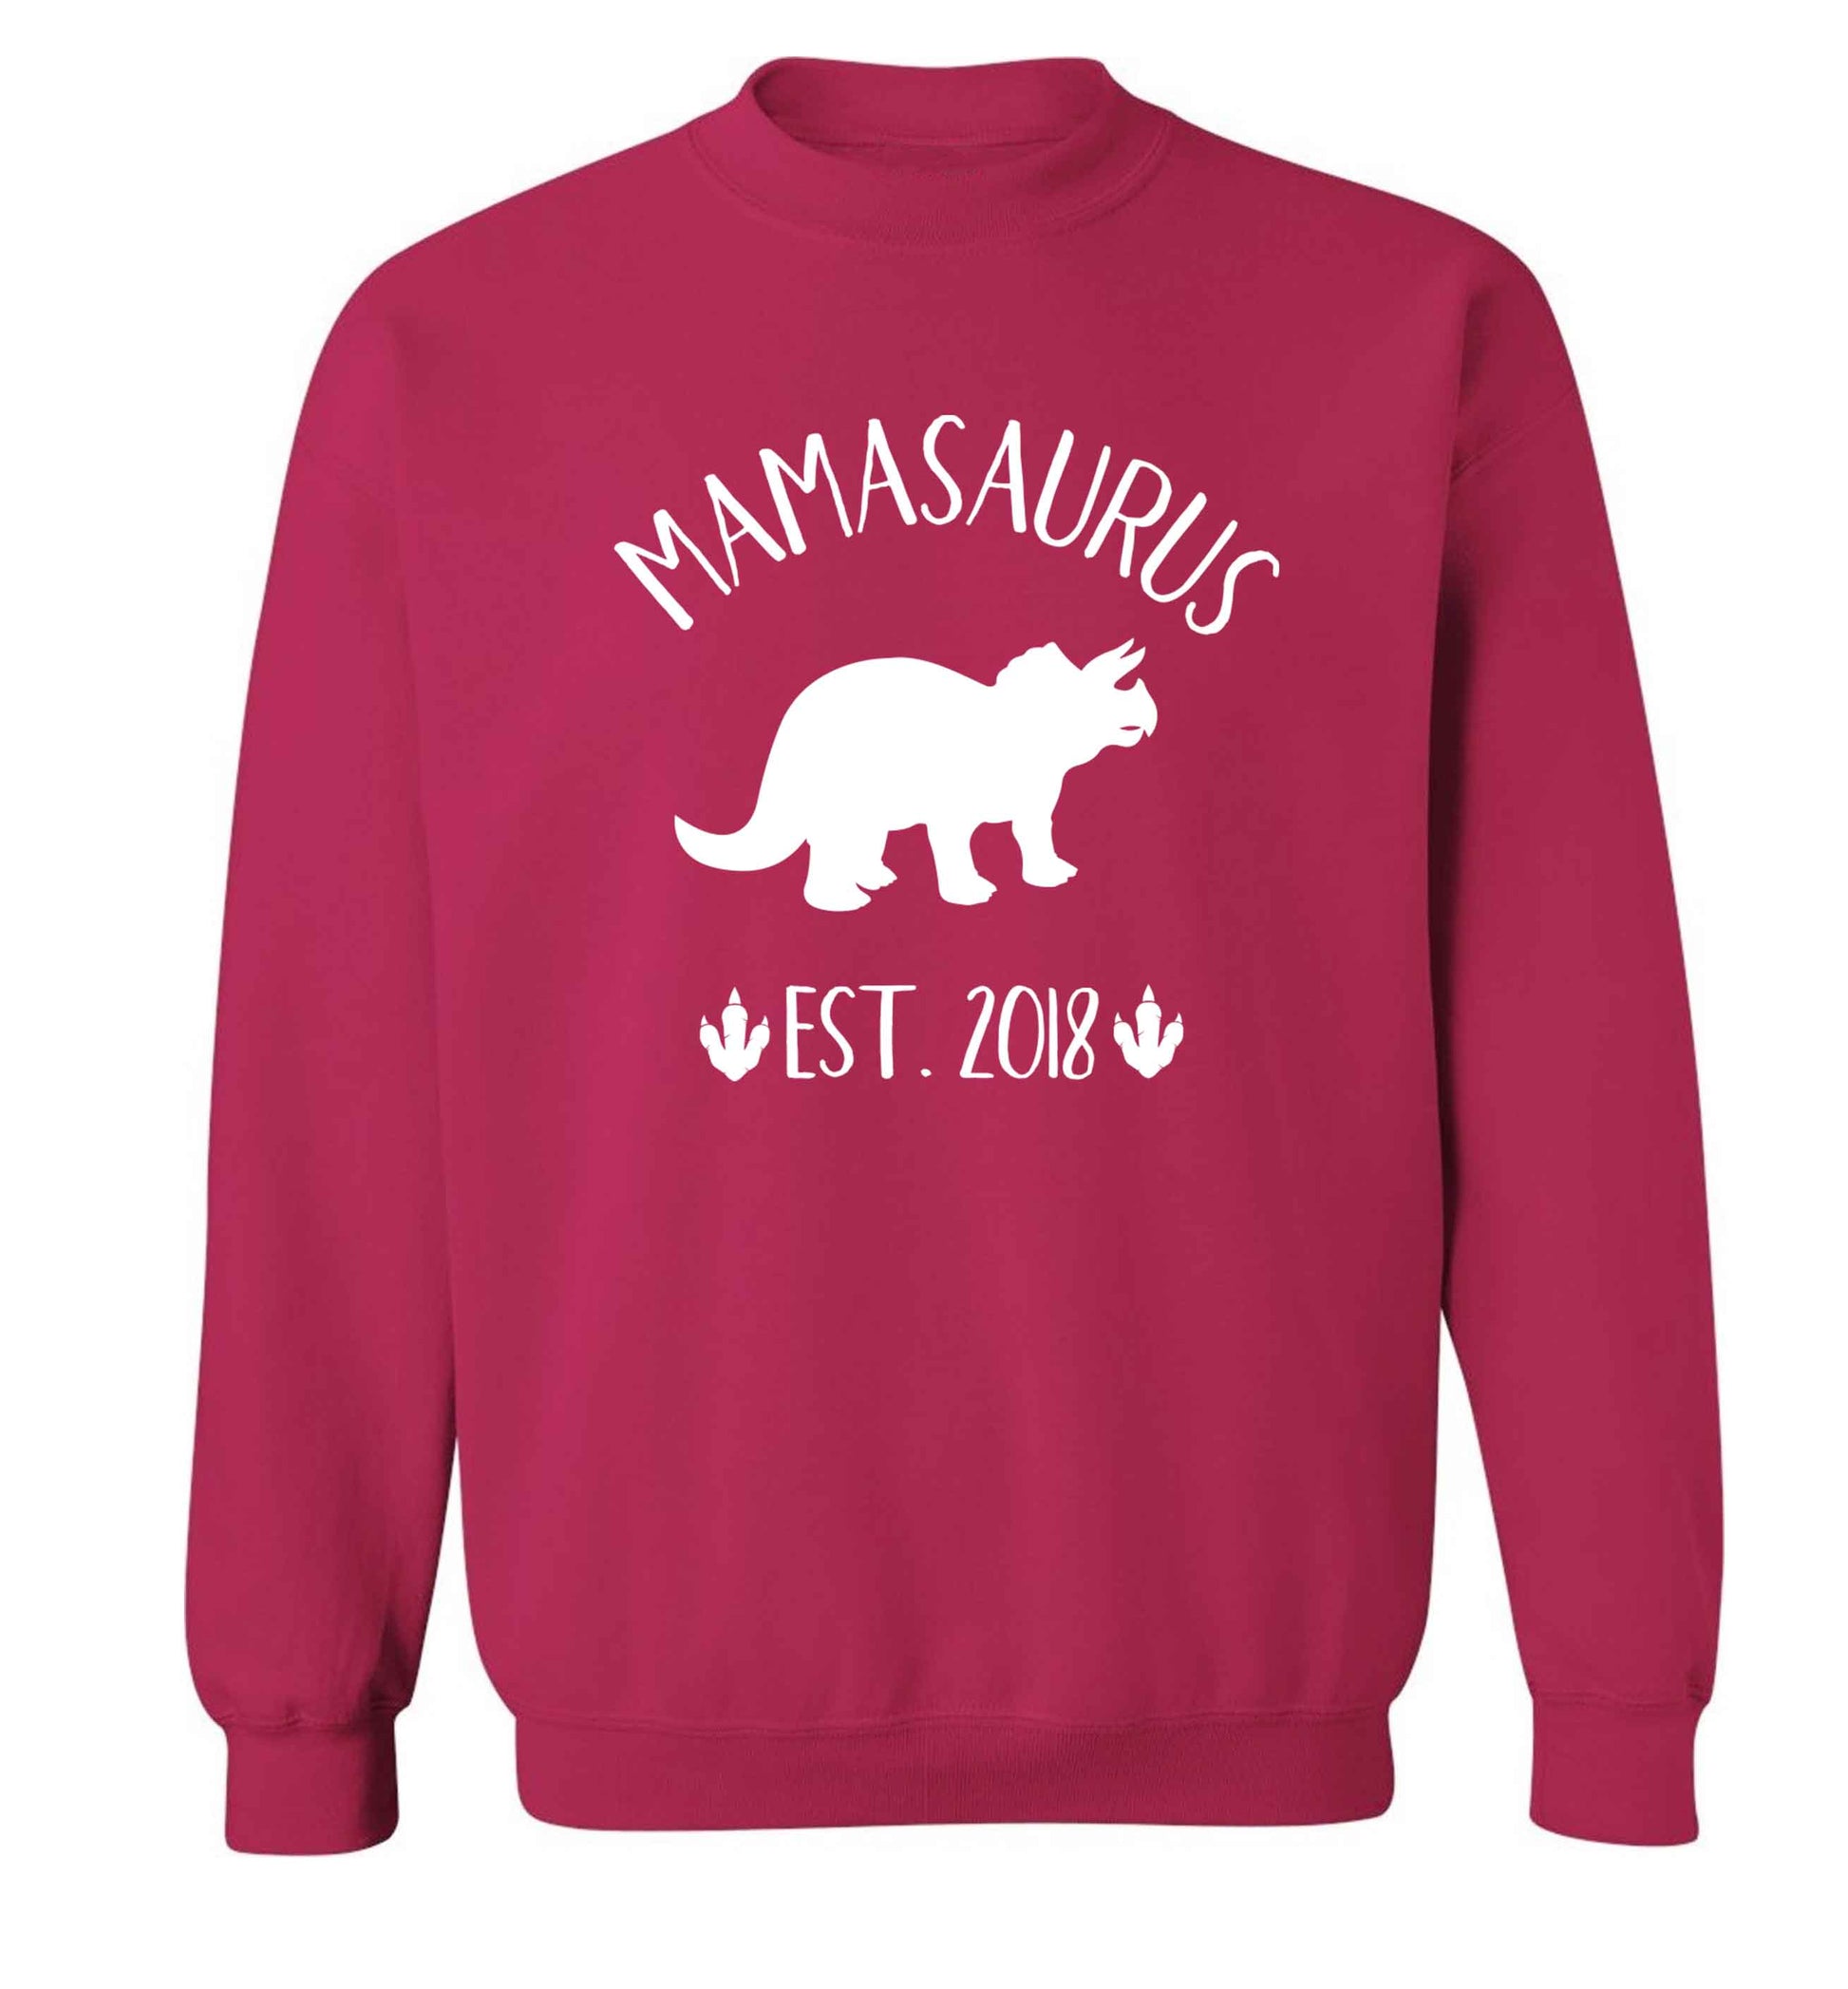 Personalised mamasaurus date adult's unisex pink sweater 2XL